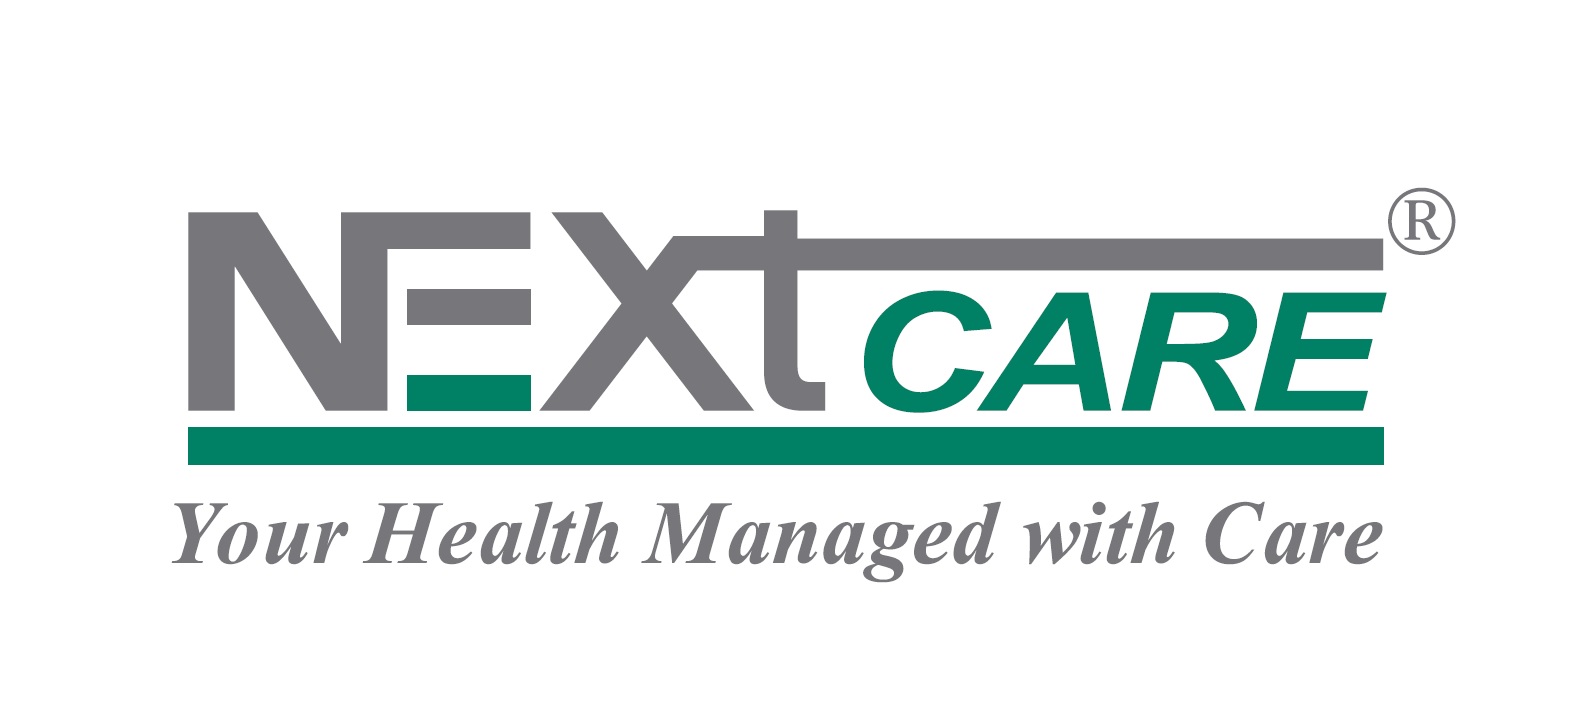 Coronavirus Outbreak Triggers Sharp Rise in NEXtCARE’s Video Consultation App by its Dubai and Northern Emirates Members